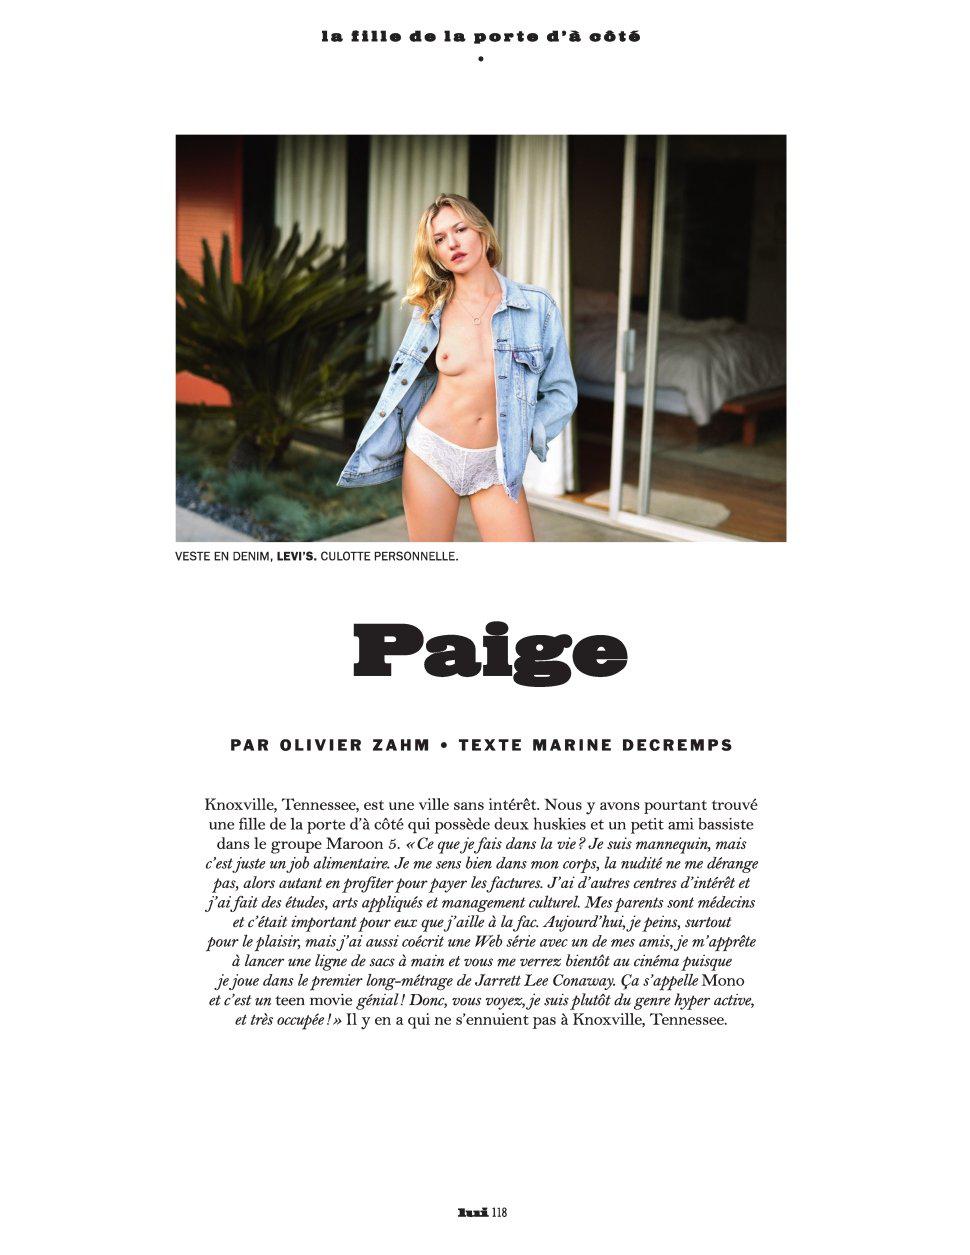 Paige topless and sexy for Lui Magazine France